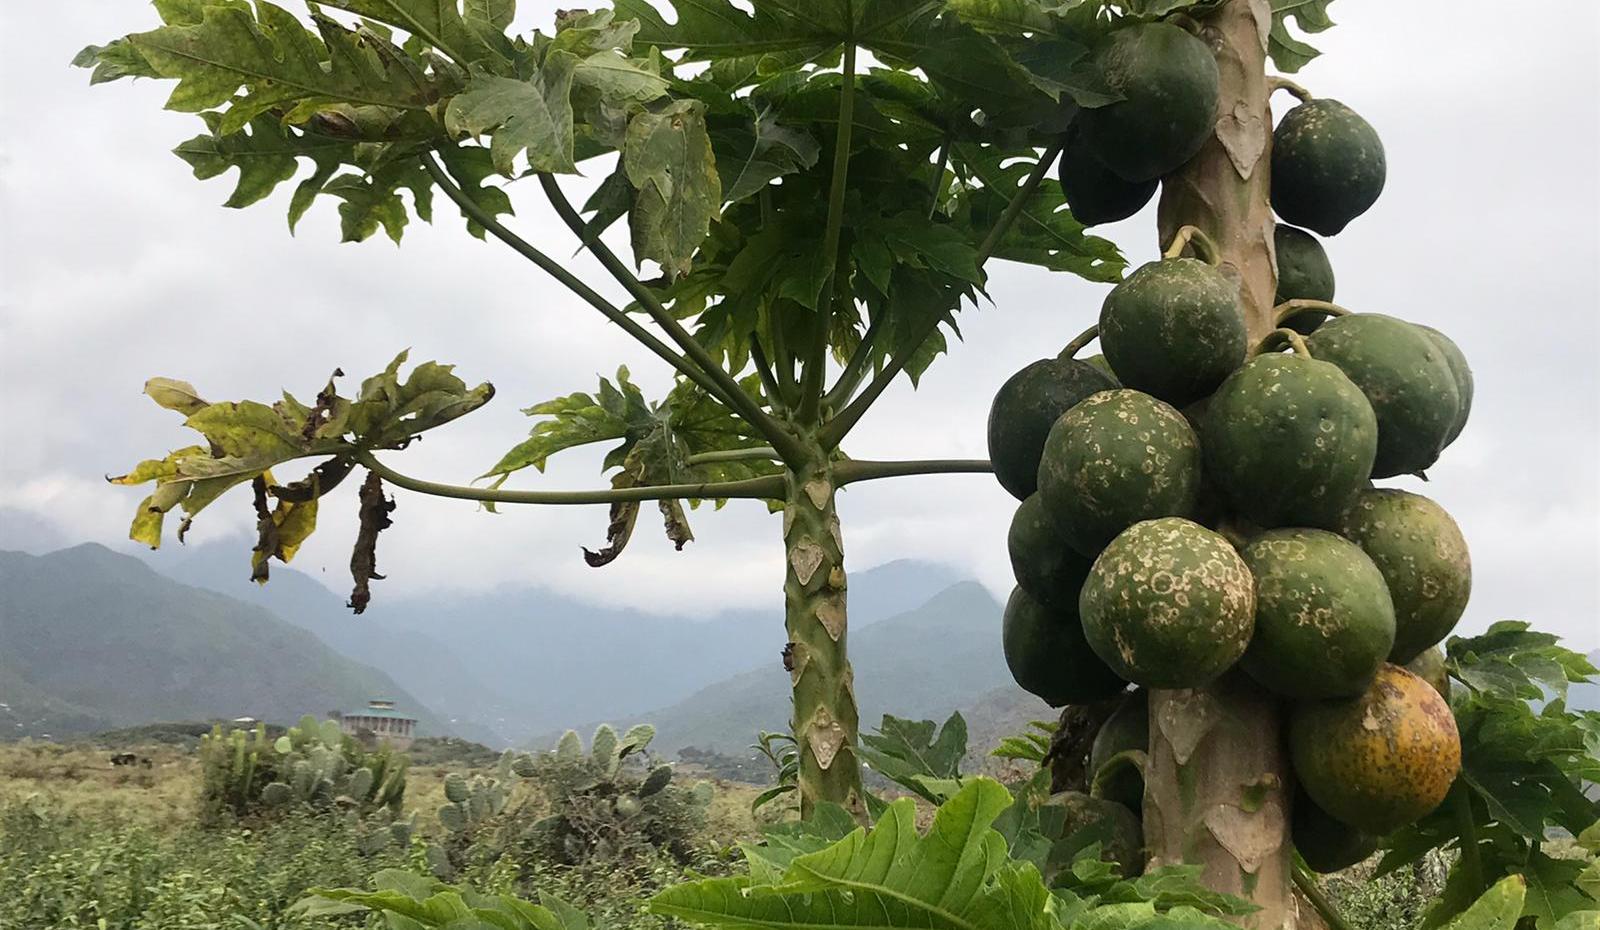 Arla and partners will reduce malnutrition with a dried papaya snack